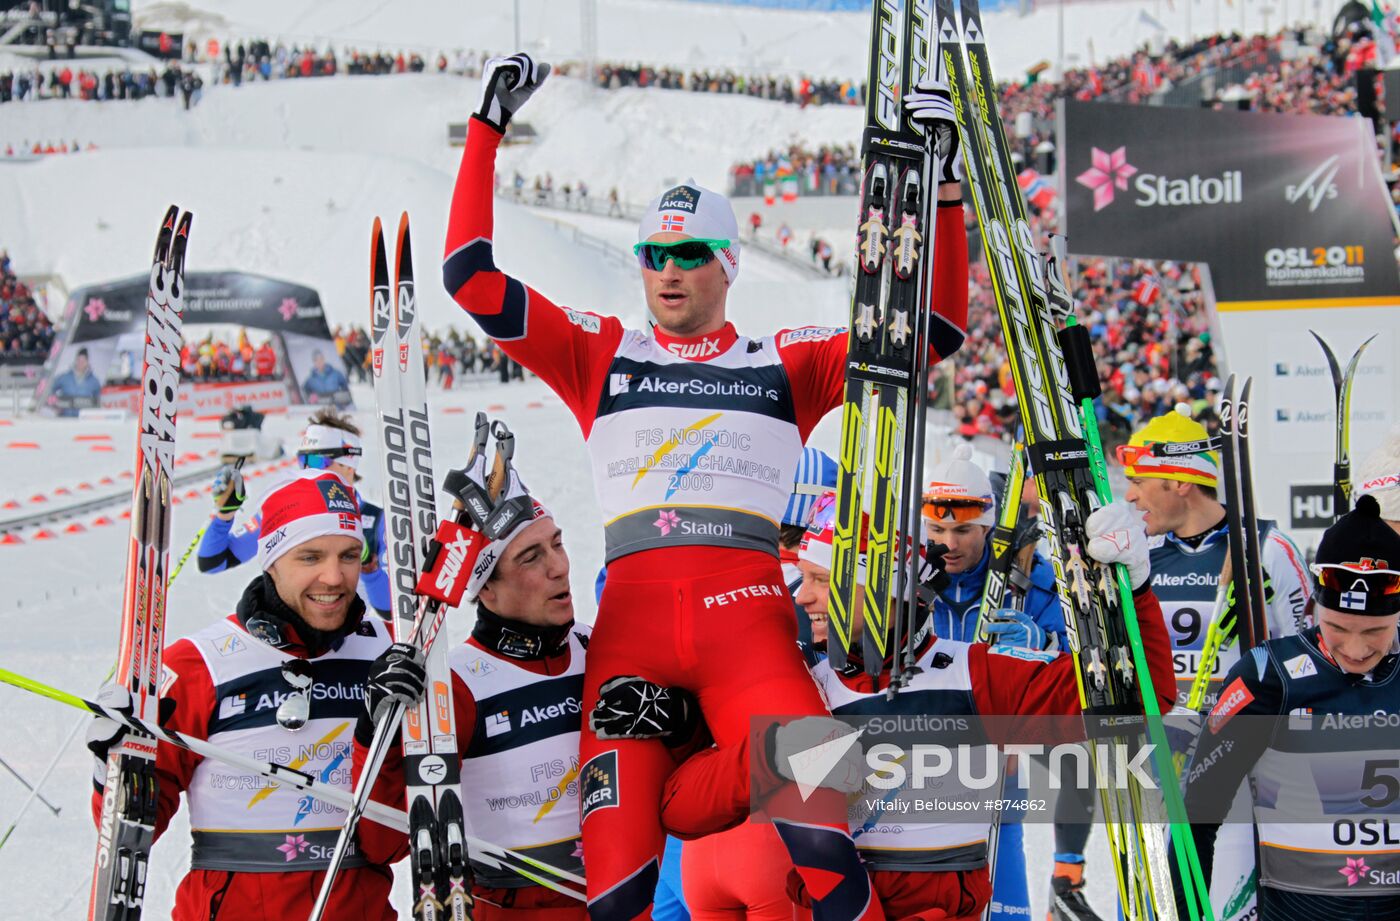 Cross-Country Skiing World Cup. Men's Relay Race